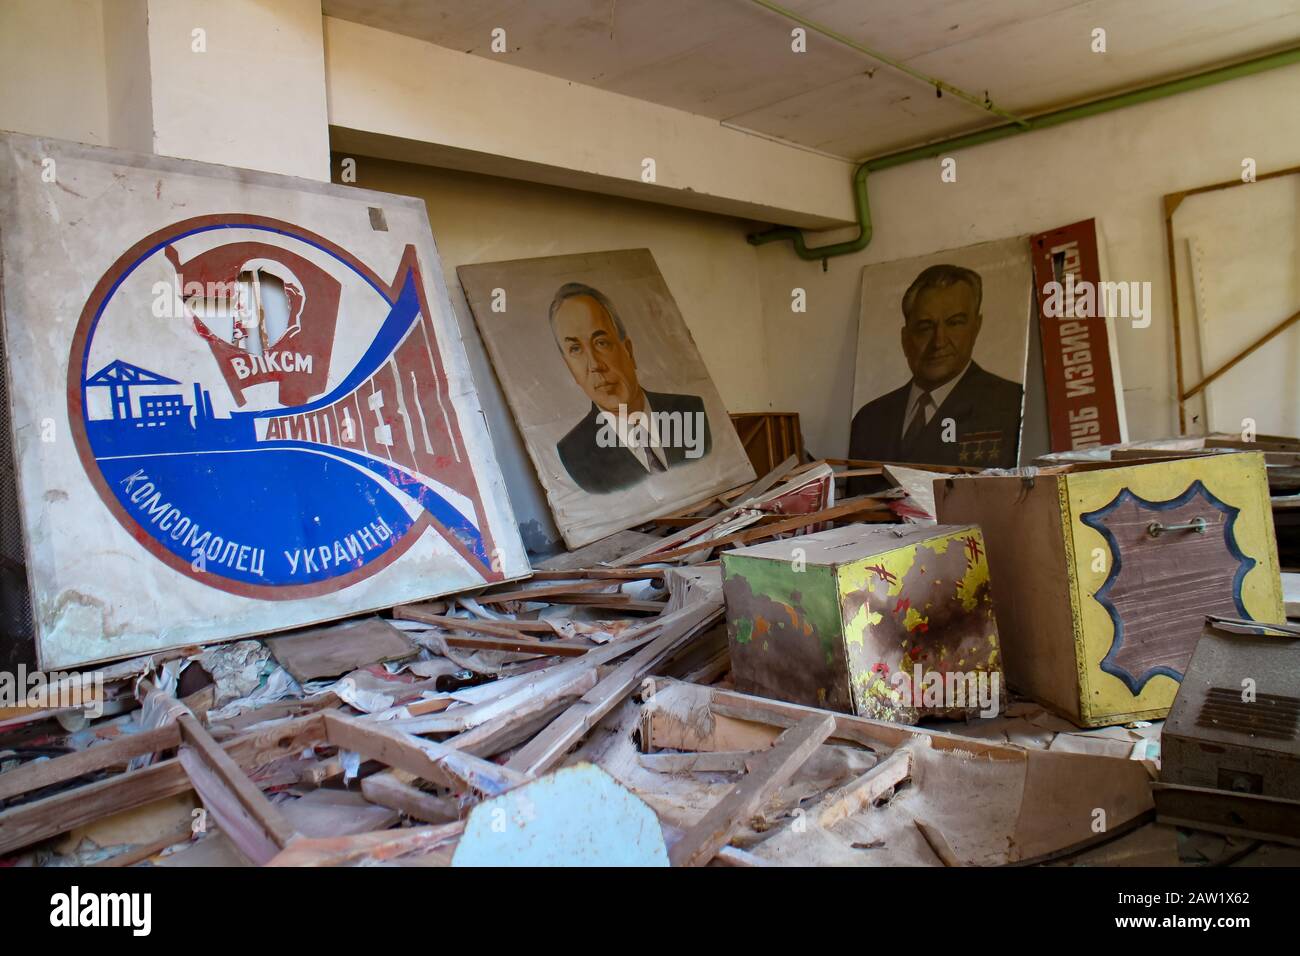 Pripyat, Ukraine - October 21, 2019: The 'Red Room', a room filled with old soviet propaganda, in the abandoned Palace of Culture in Pripyat, Ukraine. Stock Photo